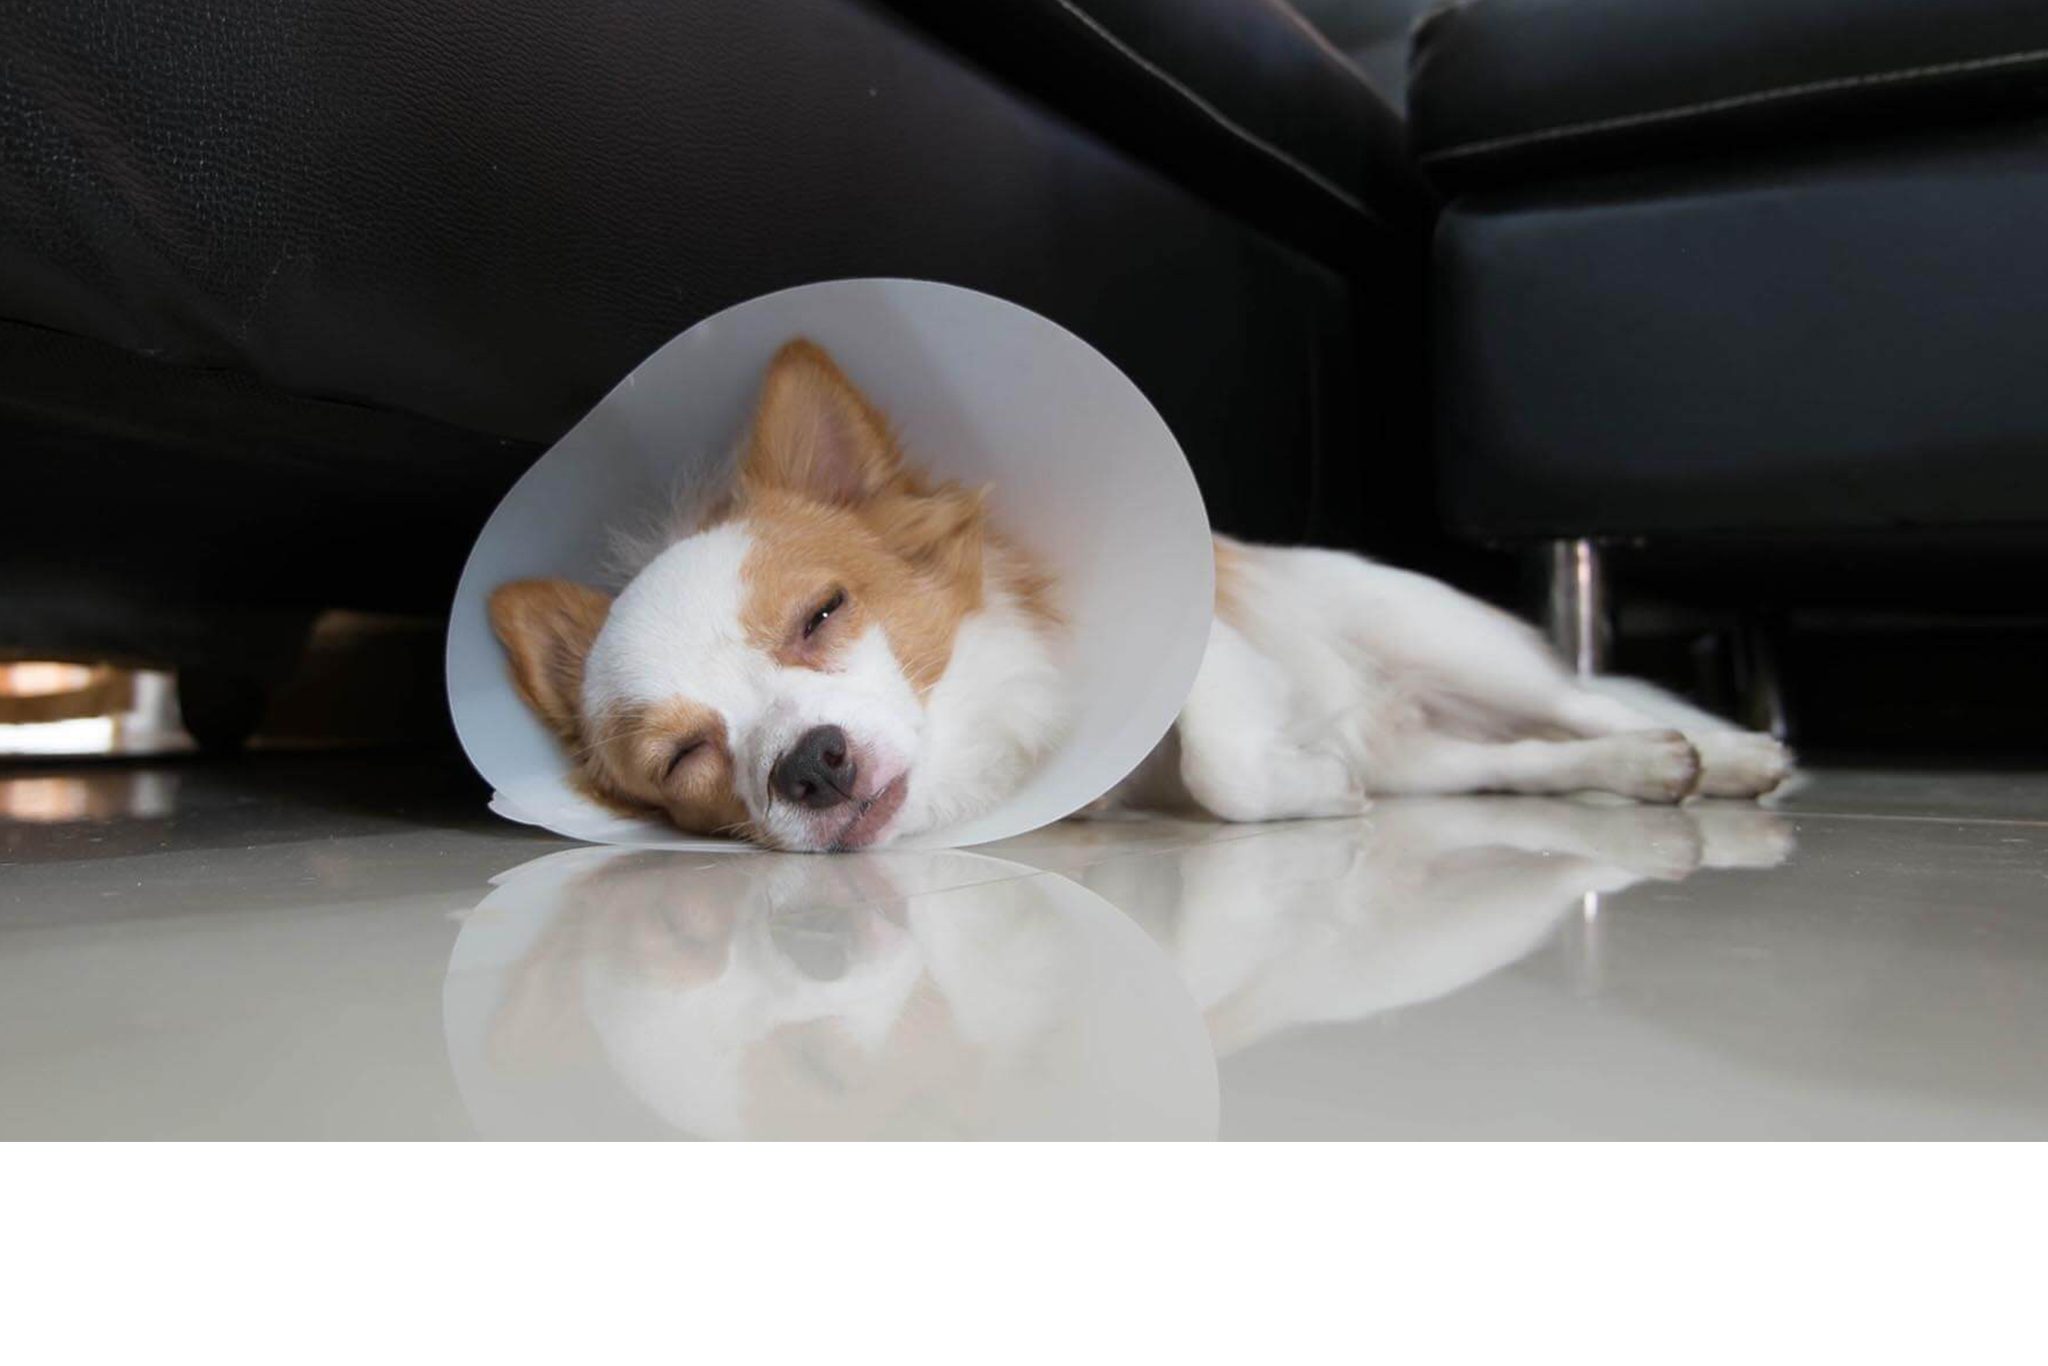 sleepy dog wearing cone laying on floor by chair